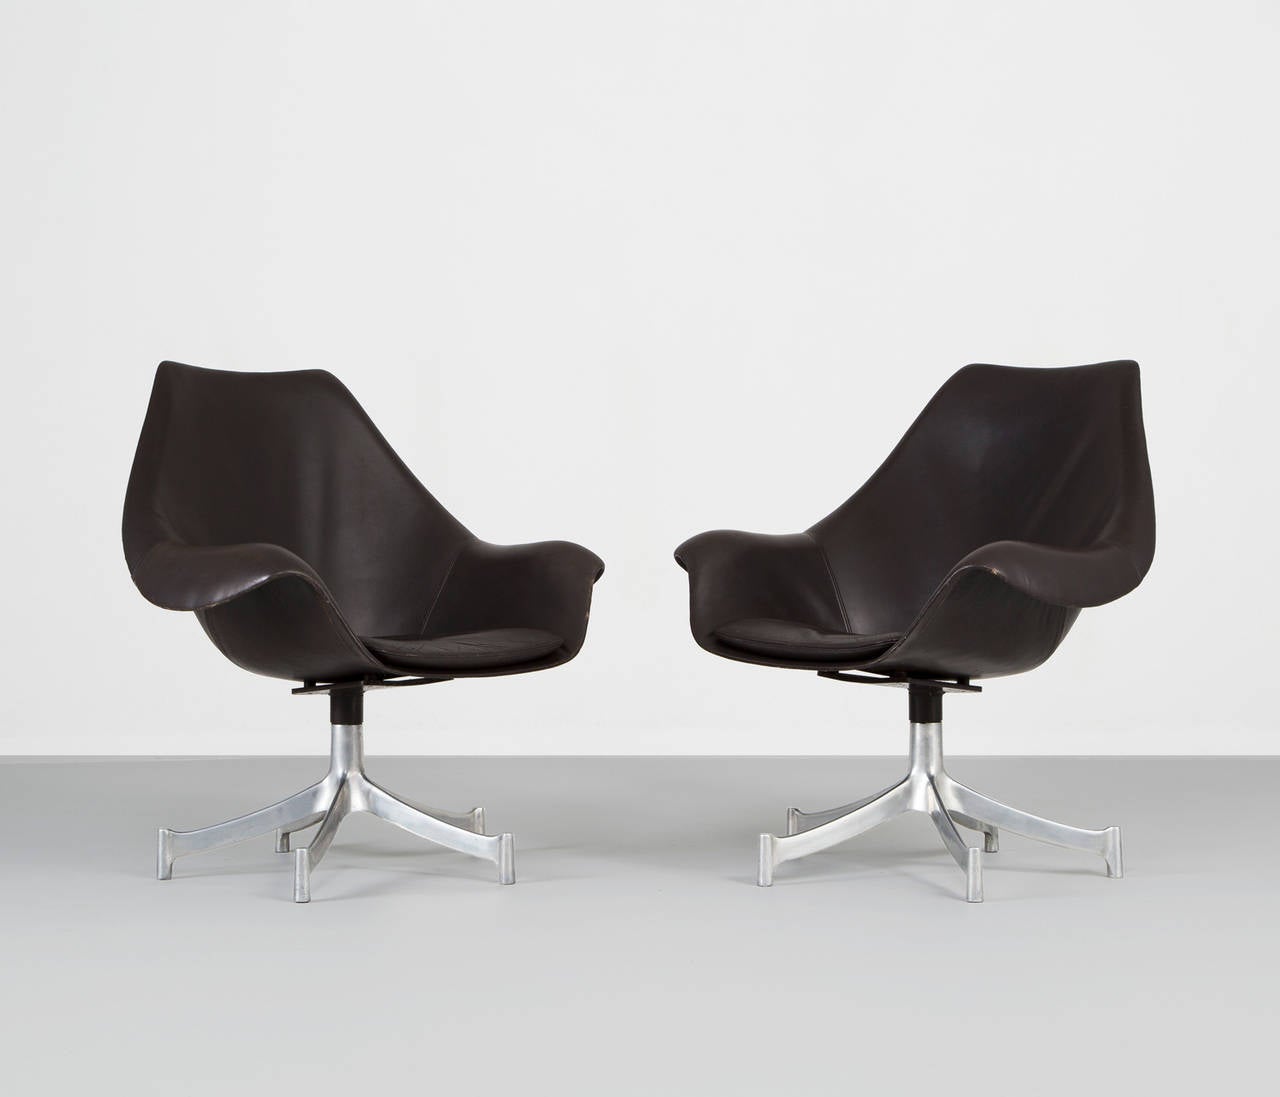 Set of Two Office Chairs designed by Jørgen Lund & Ole Larsen.

The chairs are upholstered in original thick patinated very dark-brown leather. Loose seat cushion. Five-star aluminum foot on casters. Produced by Bo-Ex.
In great vintage